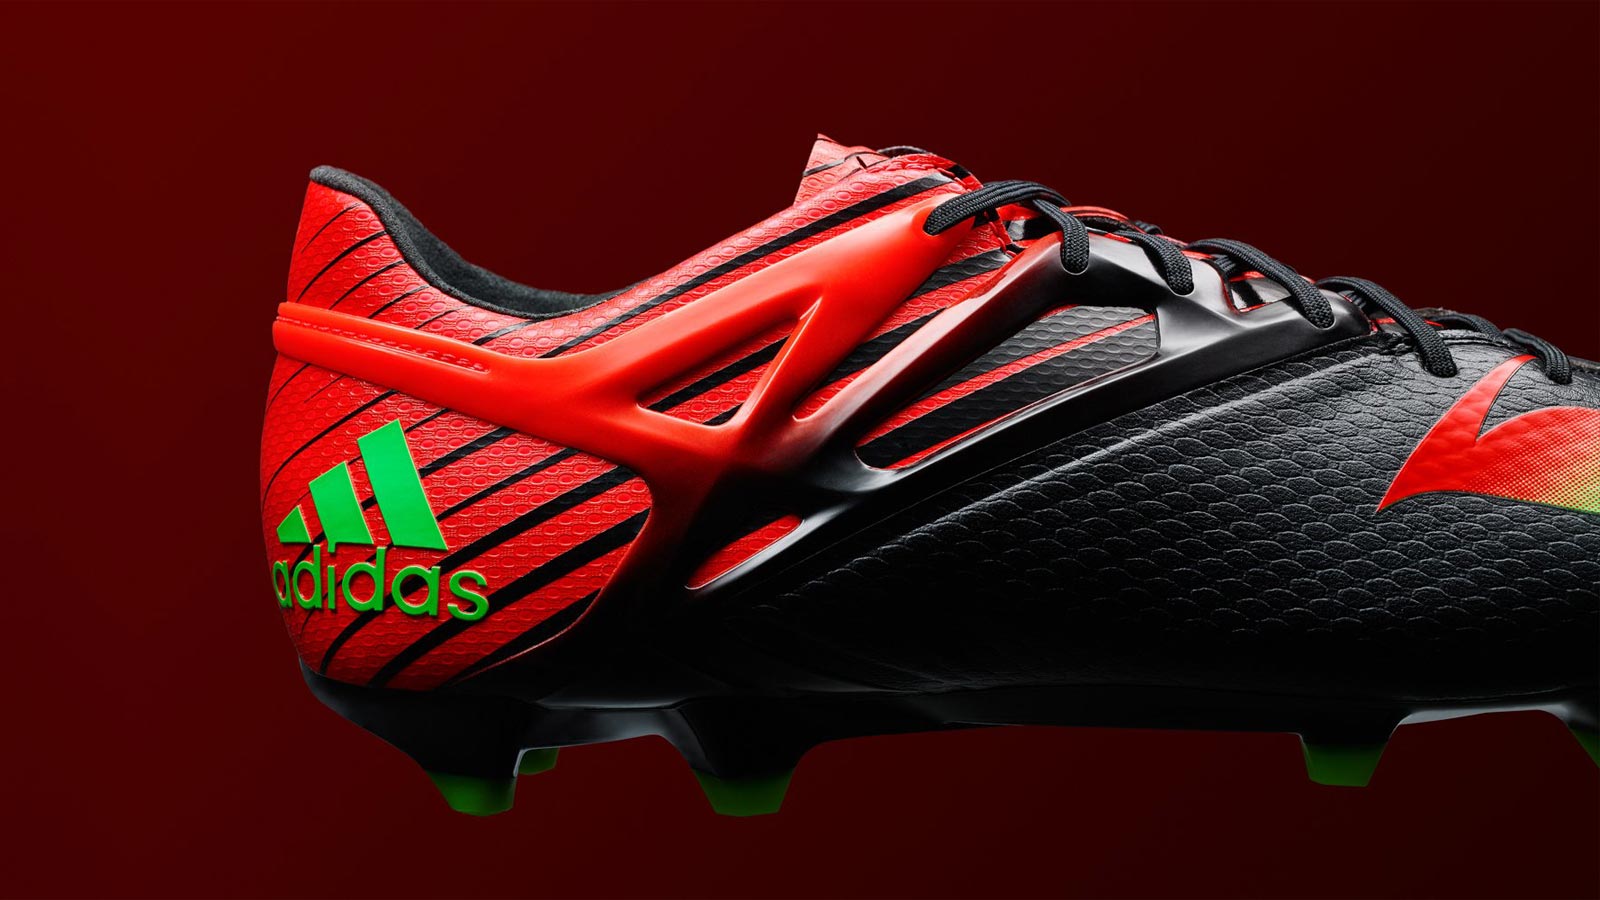 The New Black Red Adidas Messi Football Boot